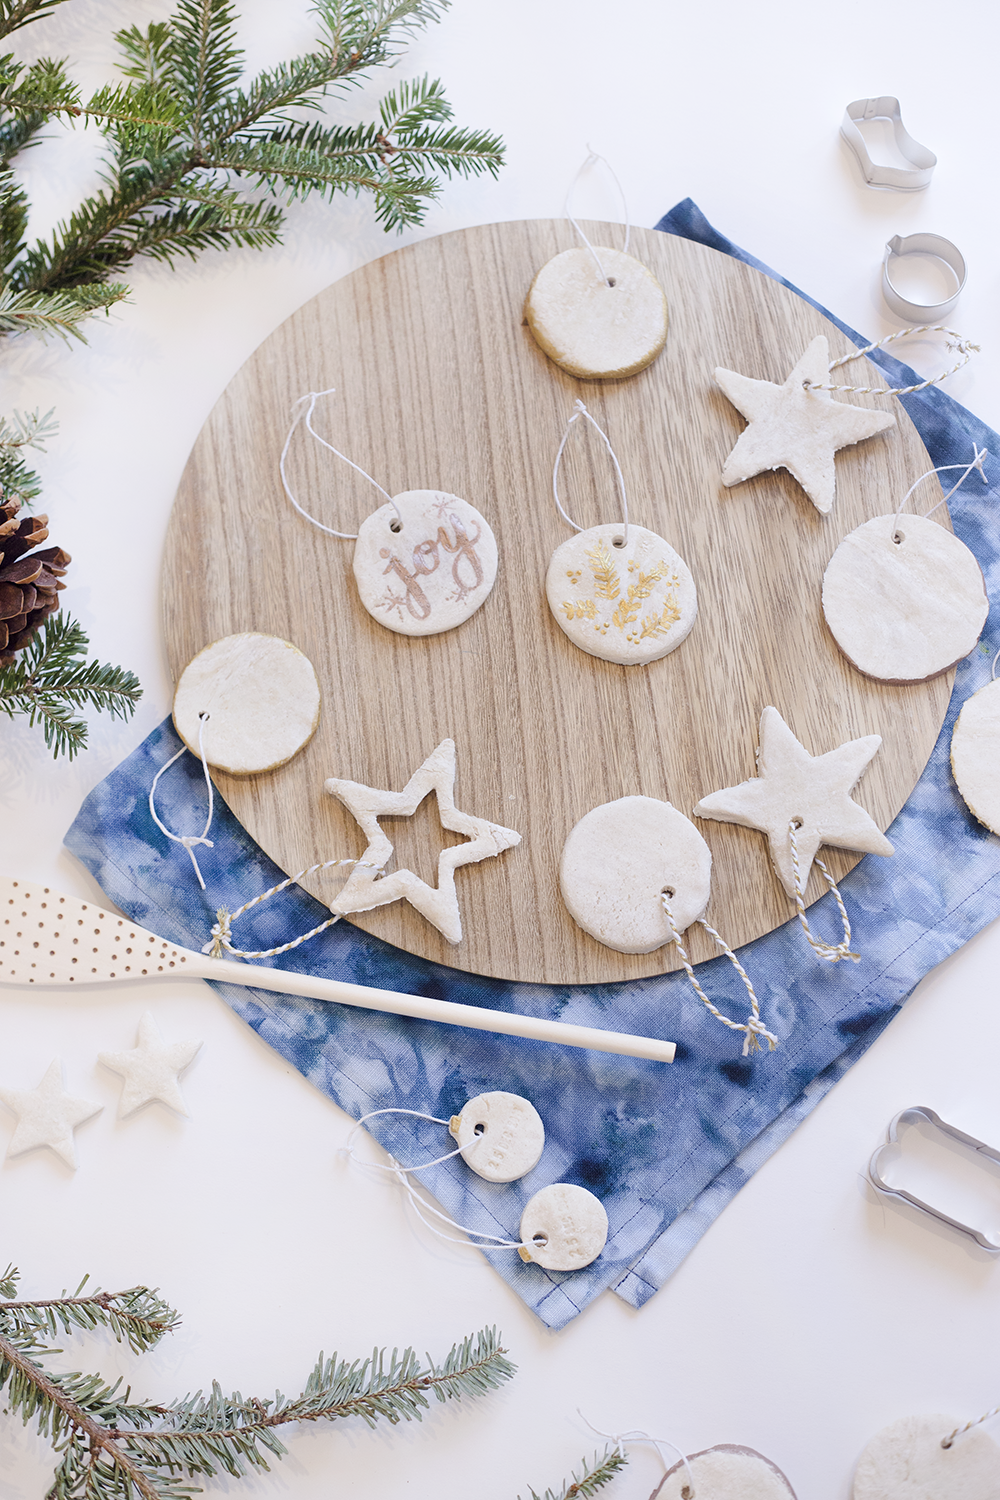 Remember the salt dough ornaments we used to make as kids? Well they're back - with a simple, elegant upgrade to bring a rustic nostalgic to your modern tree. Click through to see the recipe!